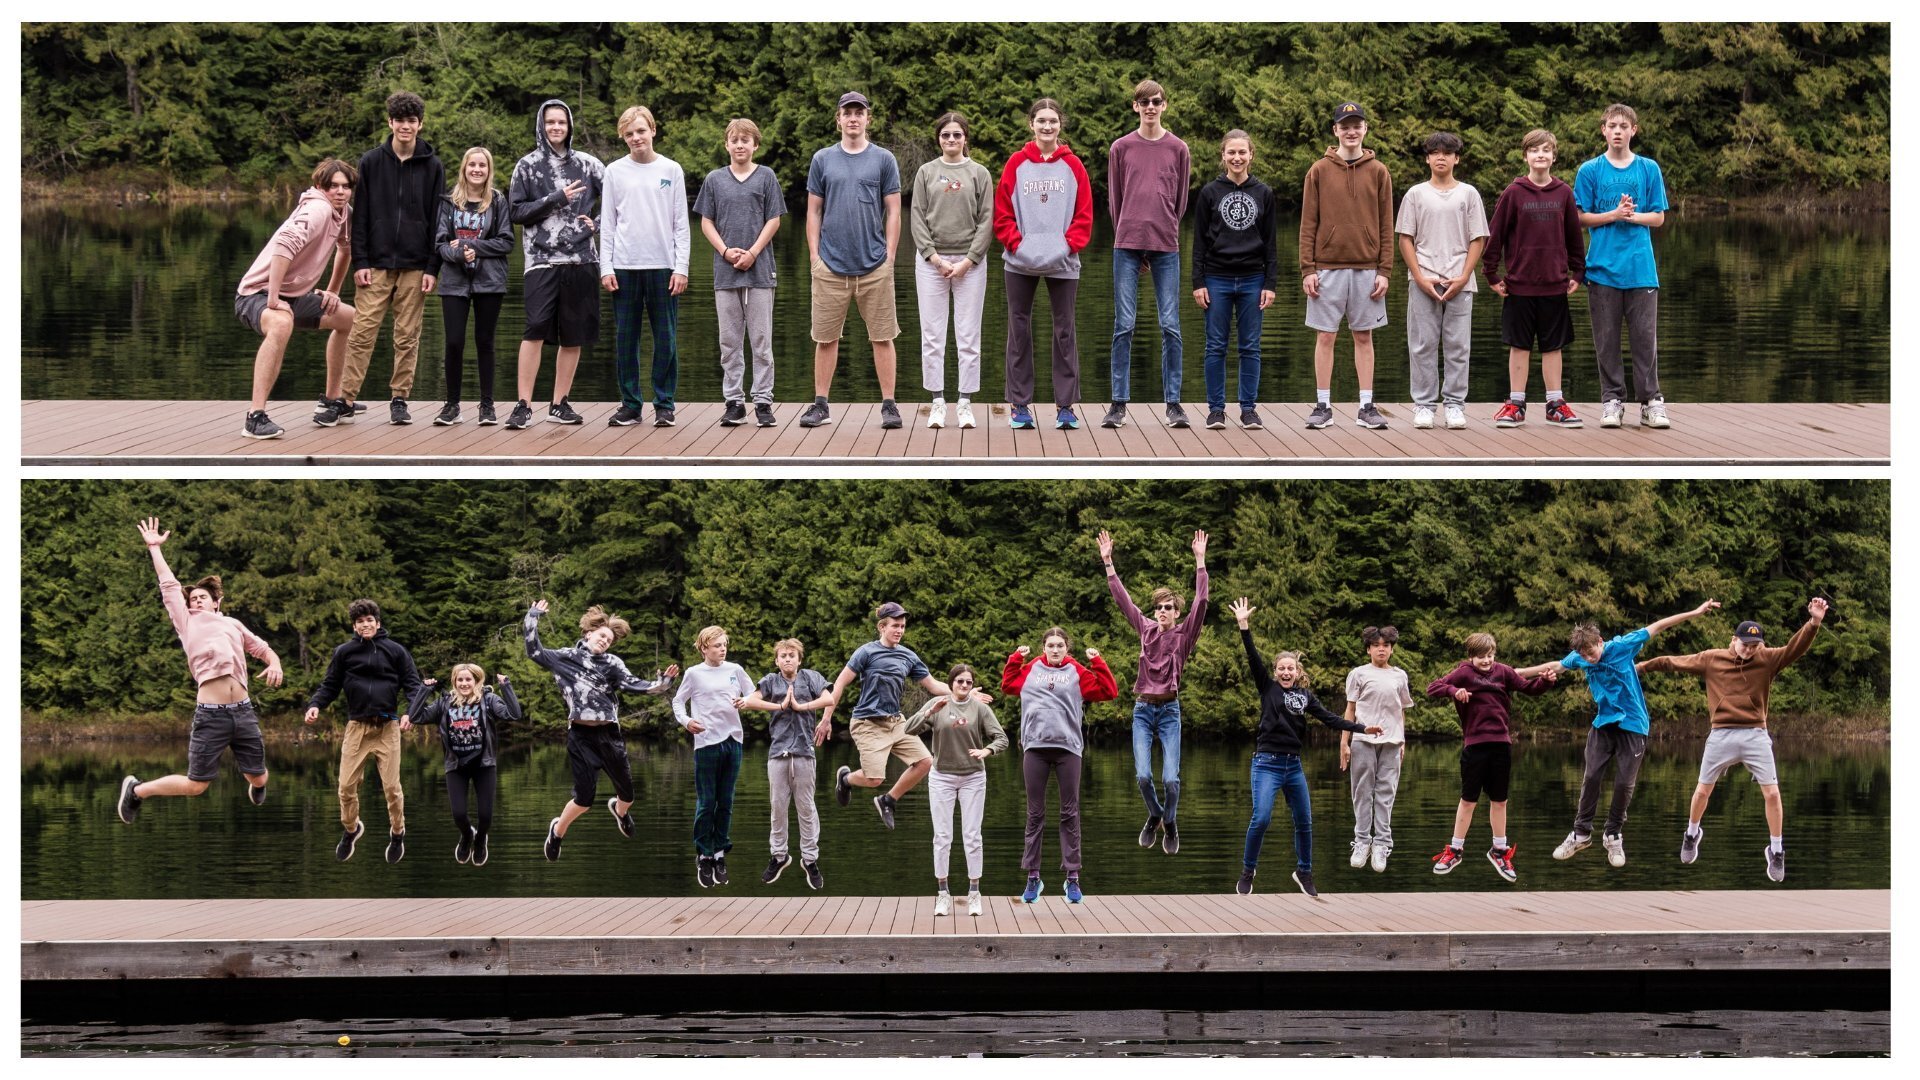 Group photos of teenagers on a  docking standing and jumping